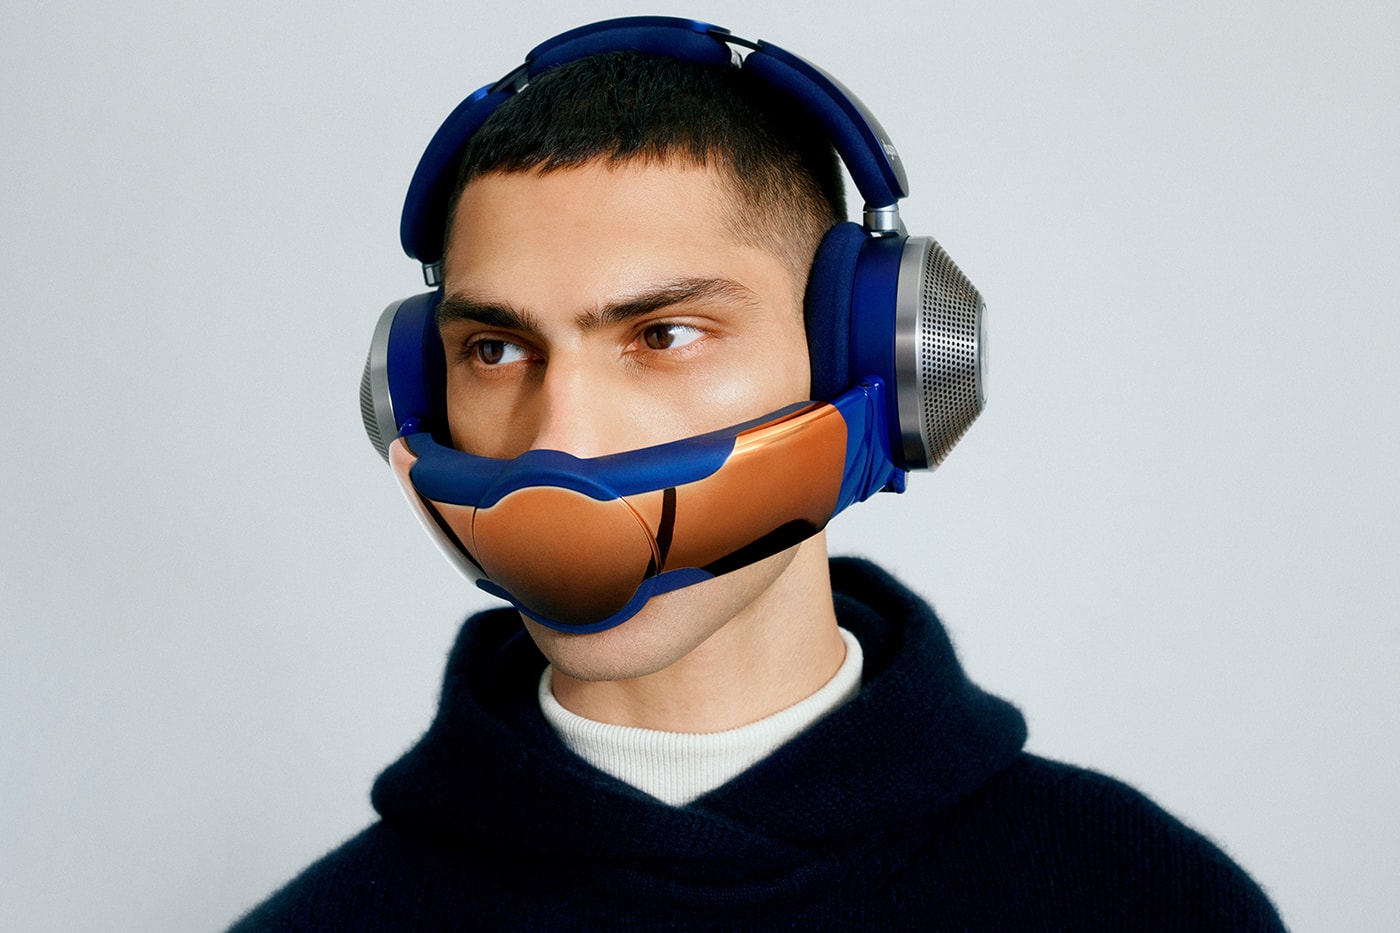 Louis Vuitton releases headphones to rival Apple's AirPods - but